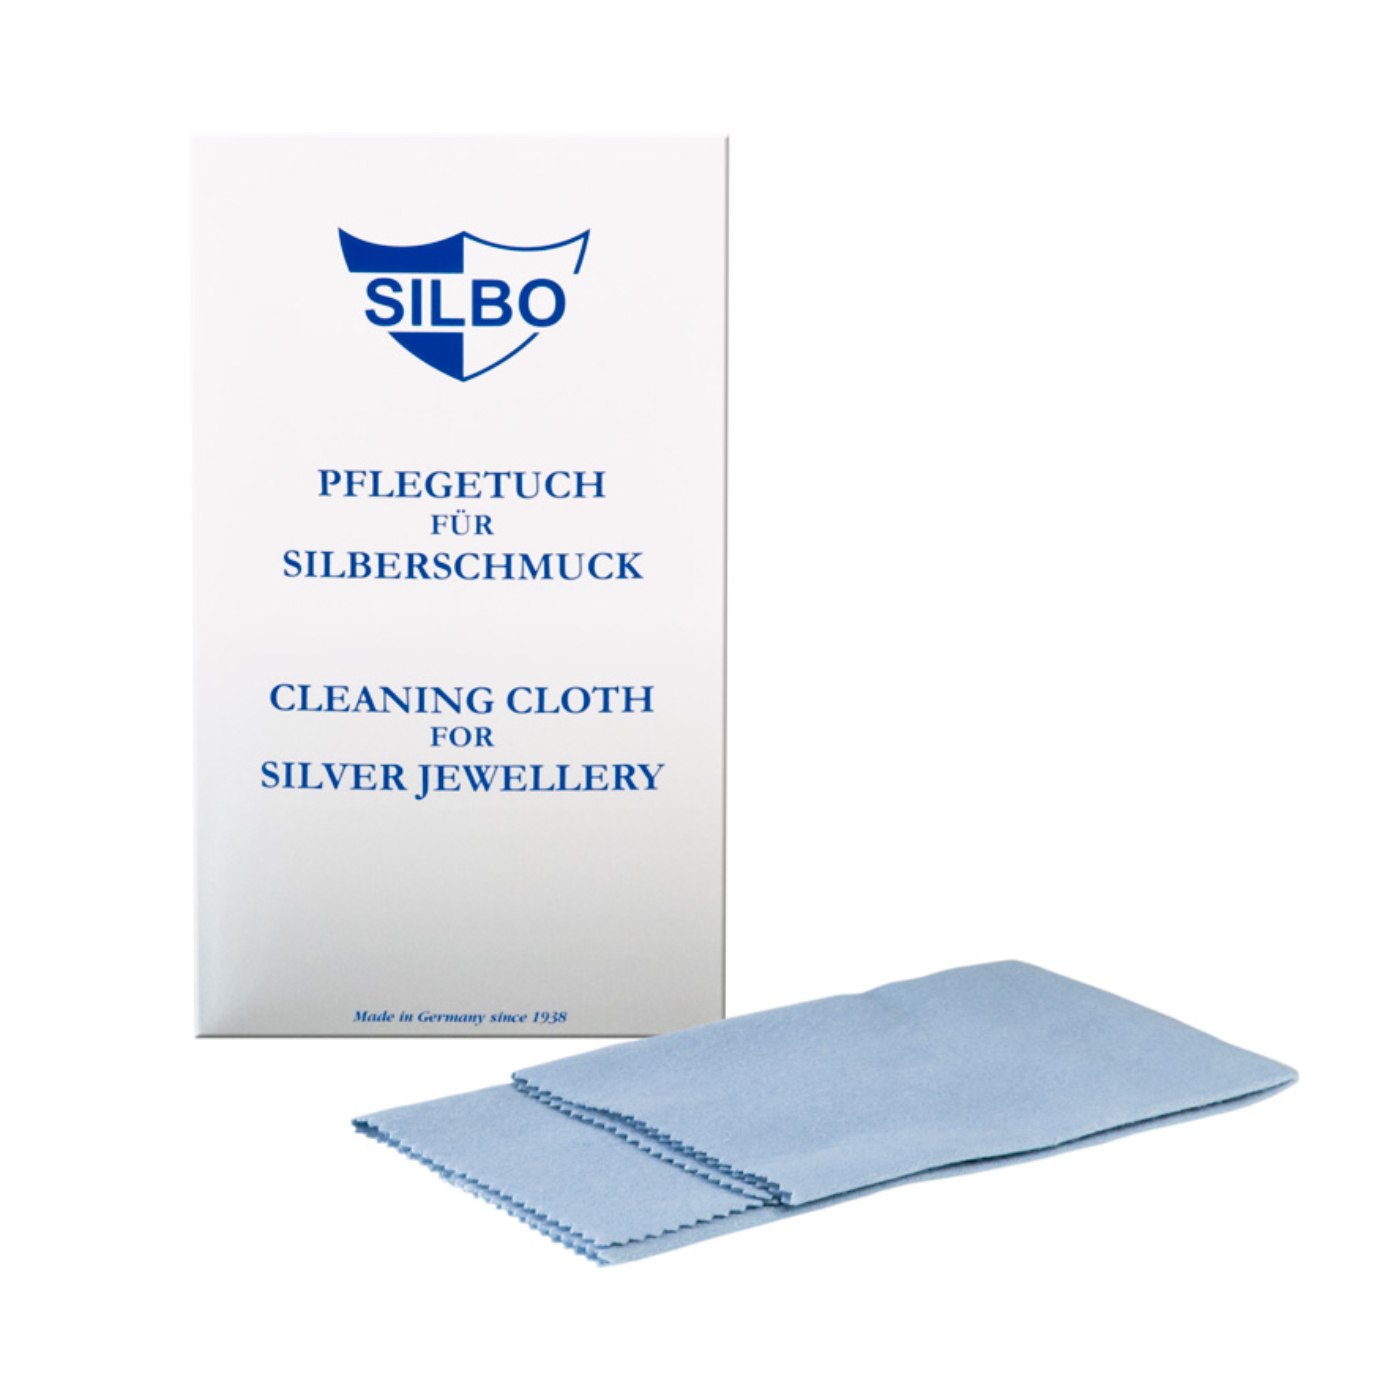 Silbo Cleaning Cloth for Silver Jewelry, Cotton, 30 x 24 cm